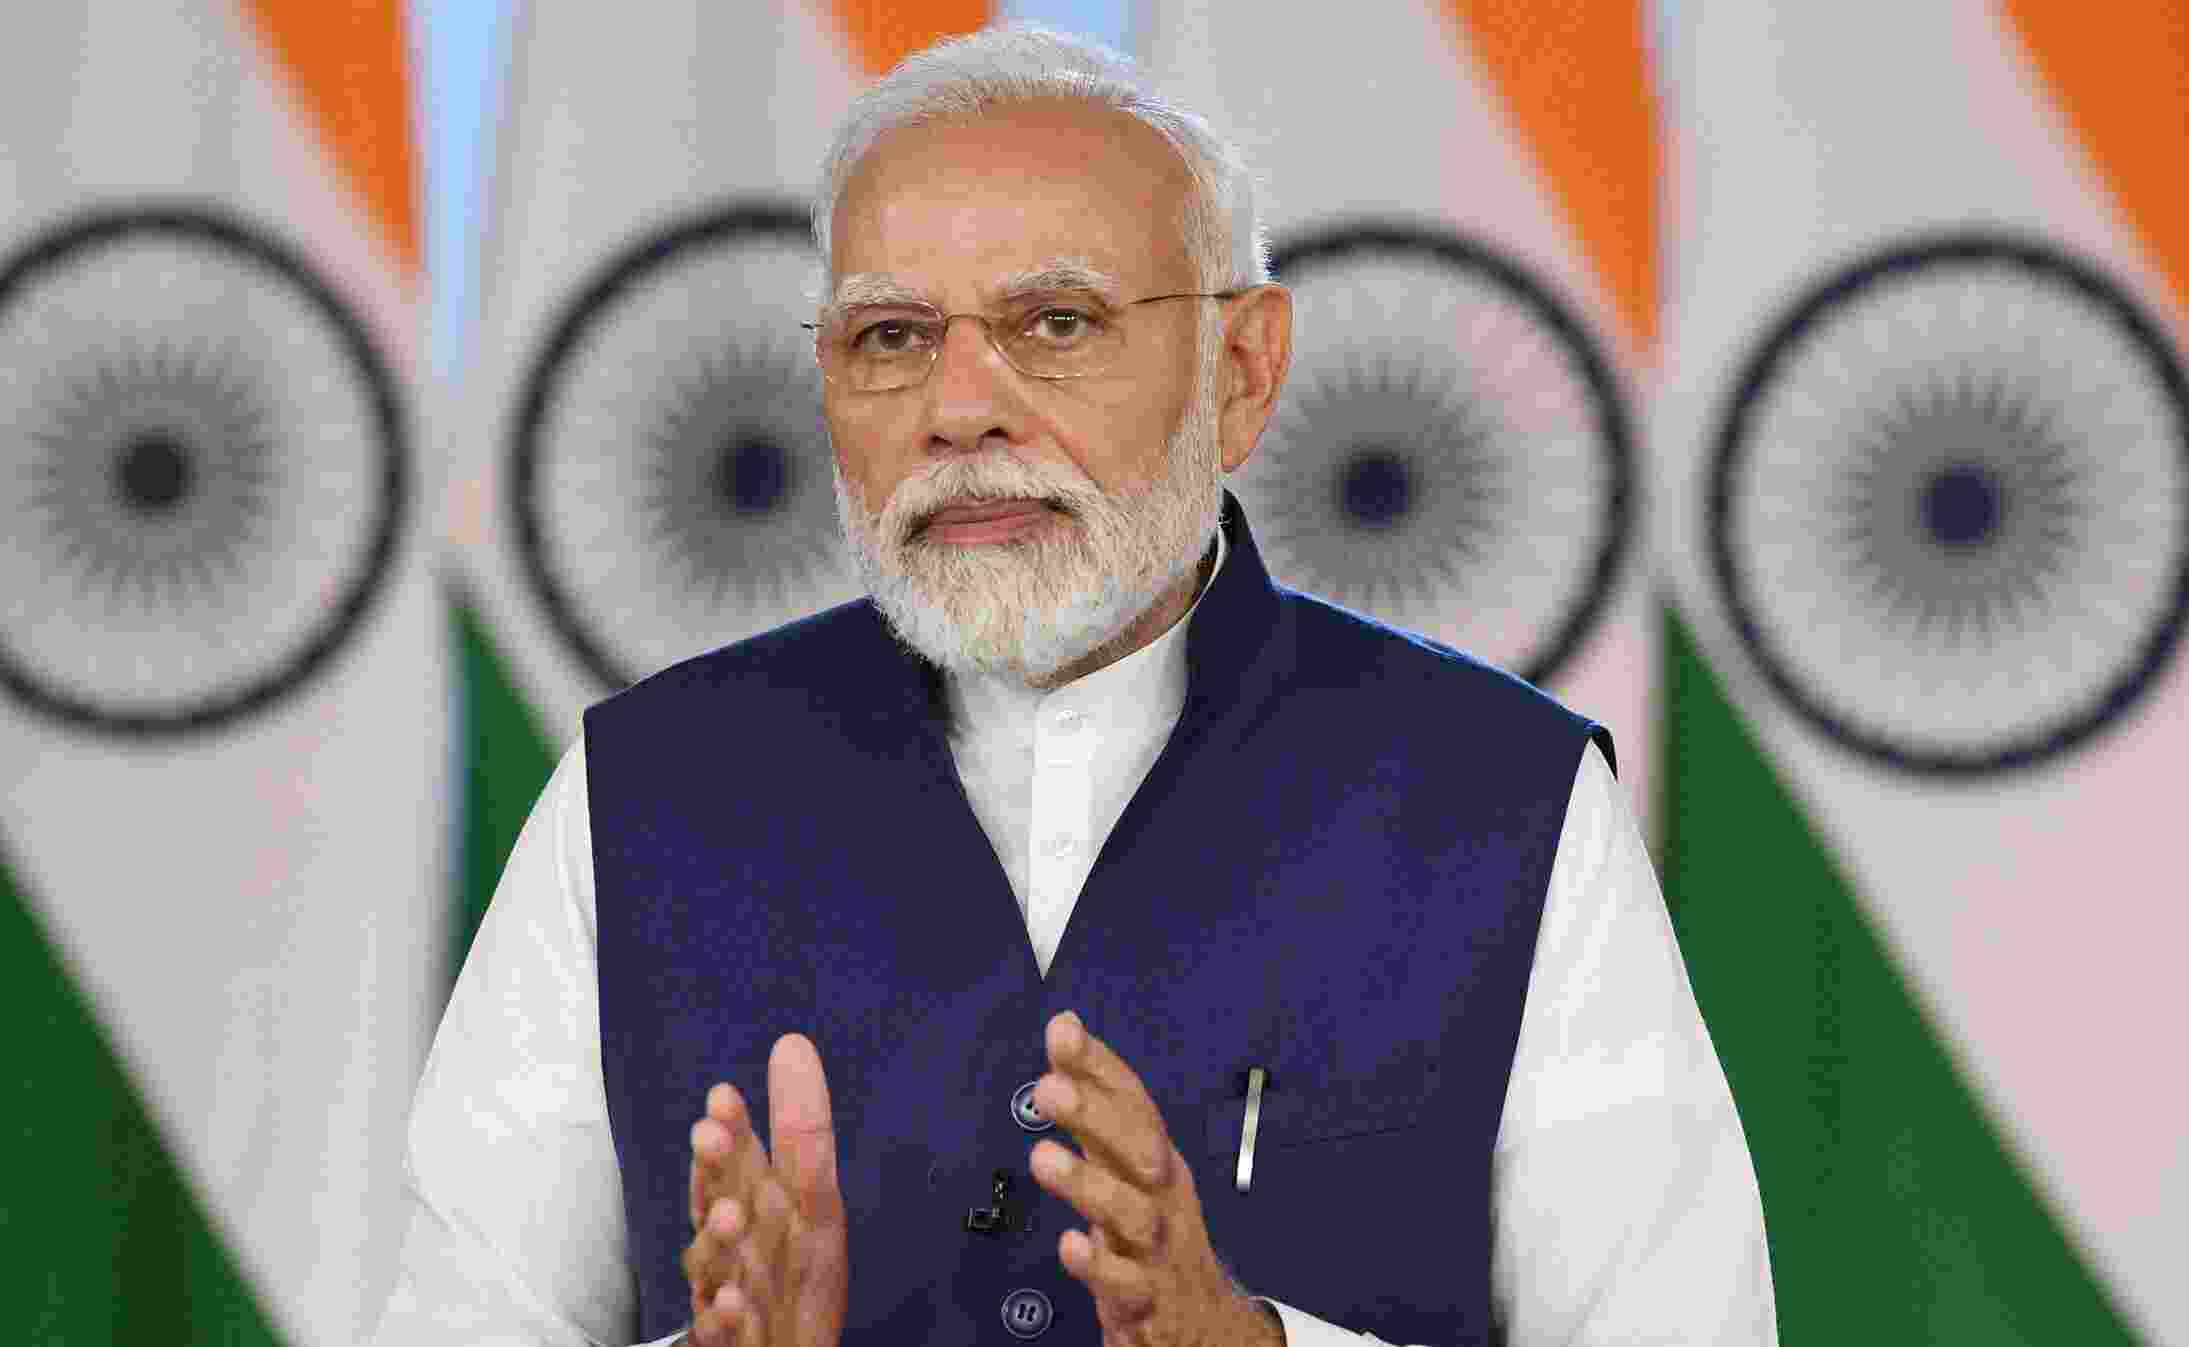 Prime Minister Narendra Modi proclaimed a decrement of ₹100 in the pricing of cooking gas cylinders for all patrons on the occasion of International Women’s Day.